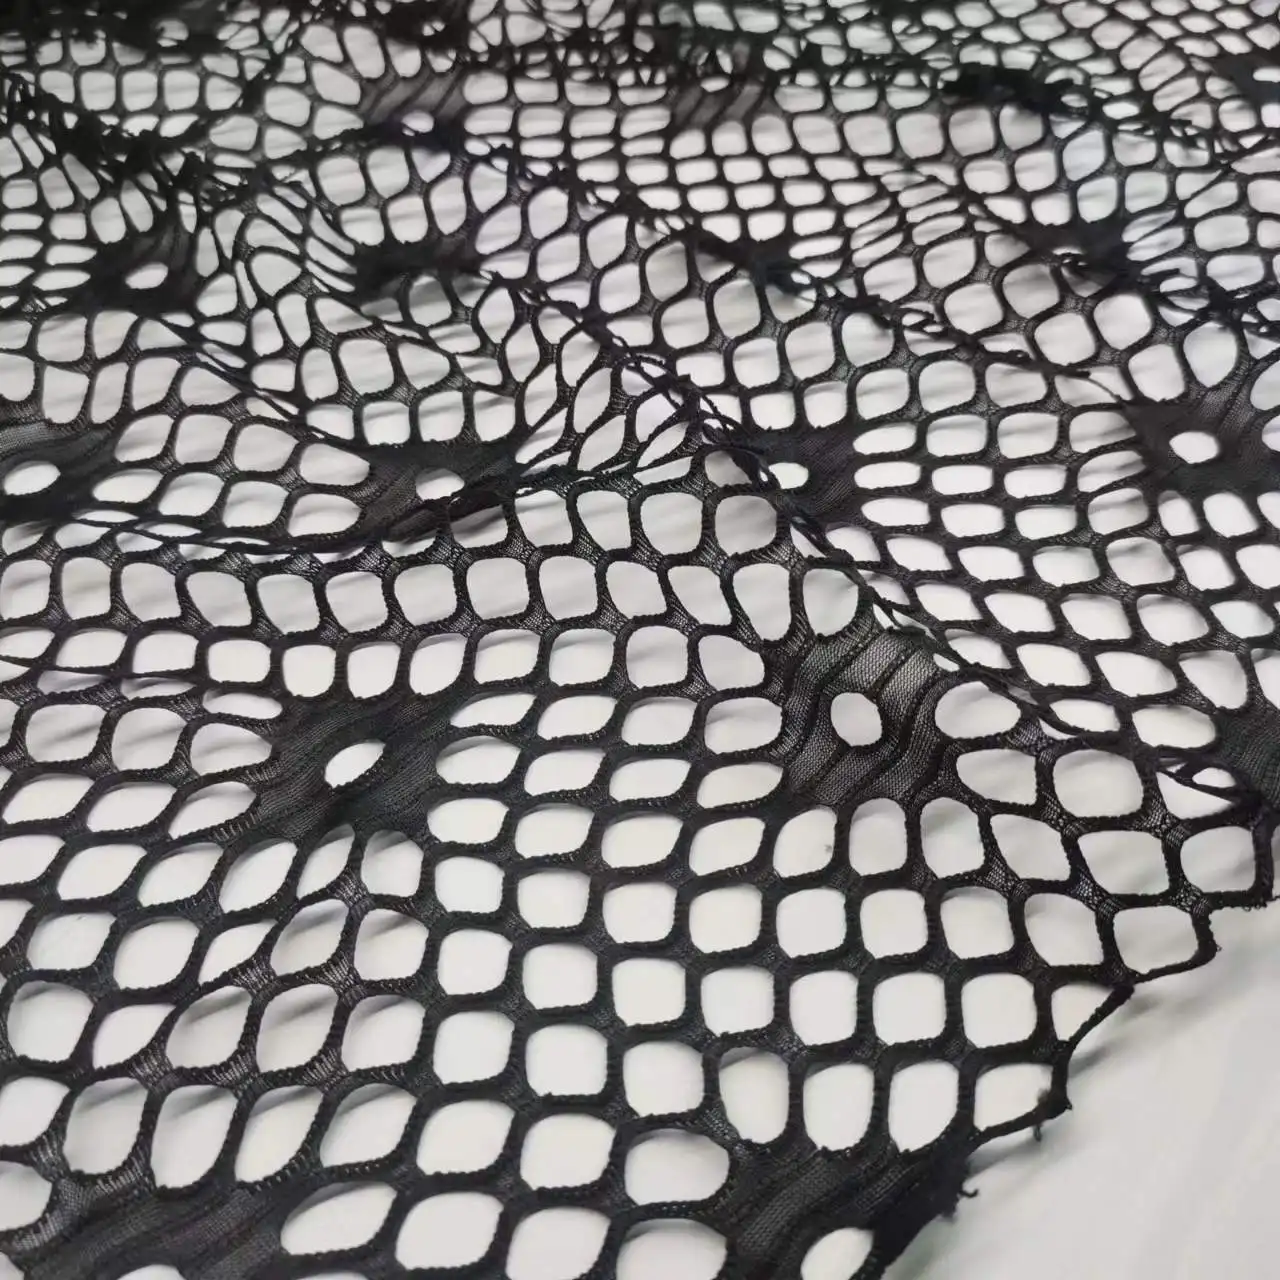 Fish Net Mesh Cloth Fabric Large Hole Lace Clothing Material Dress